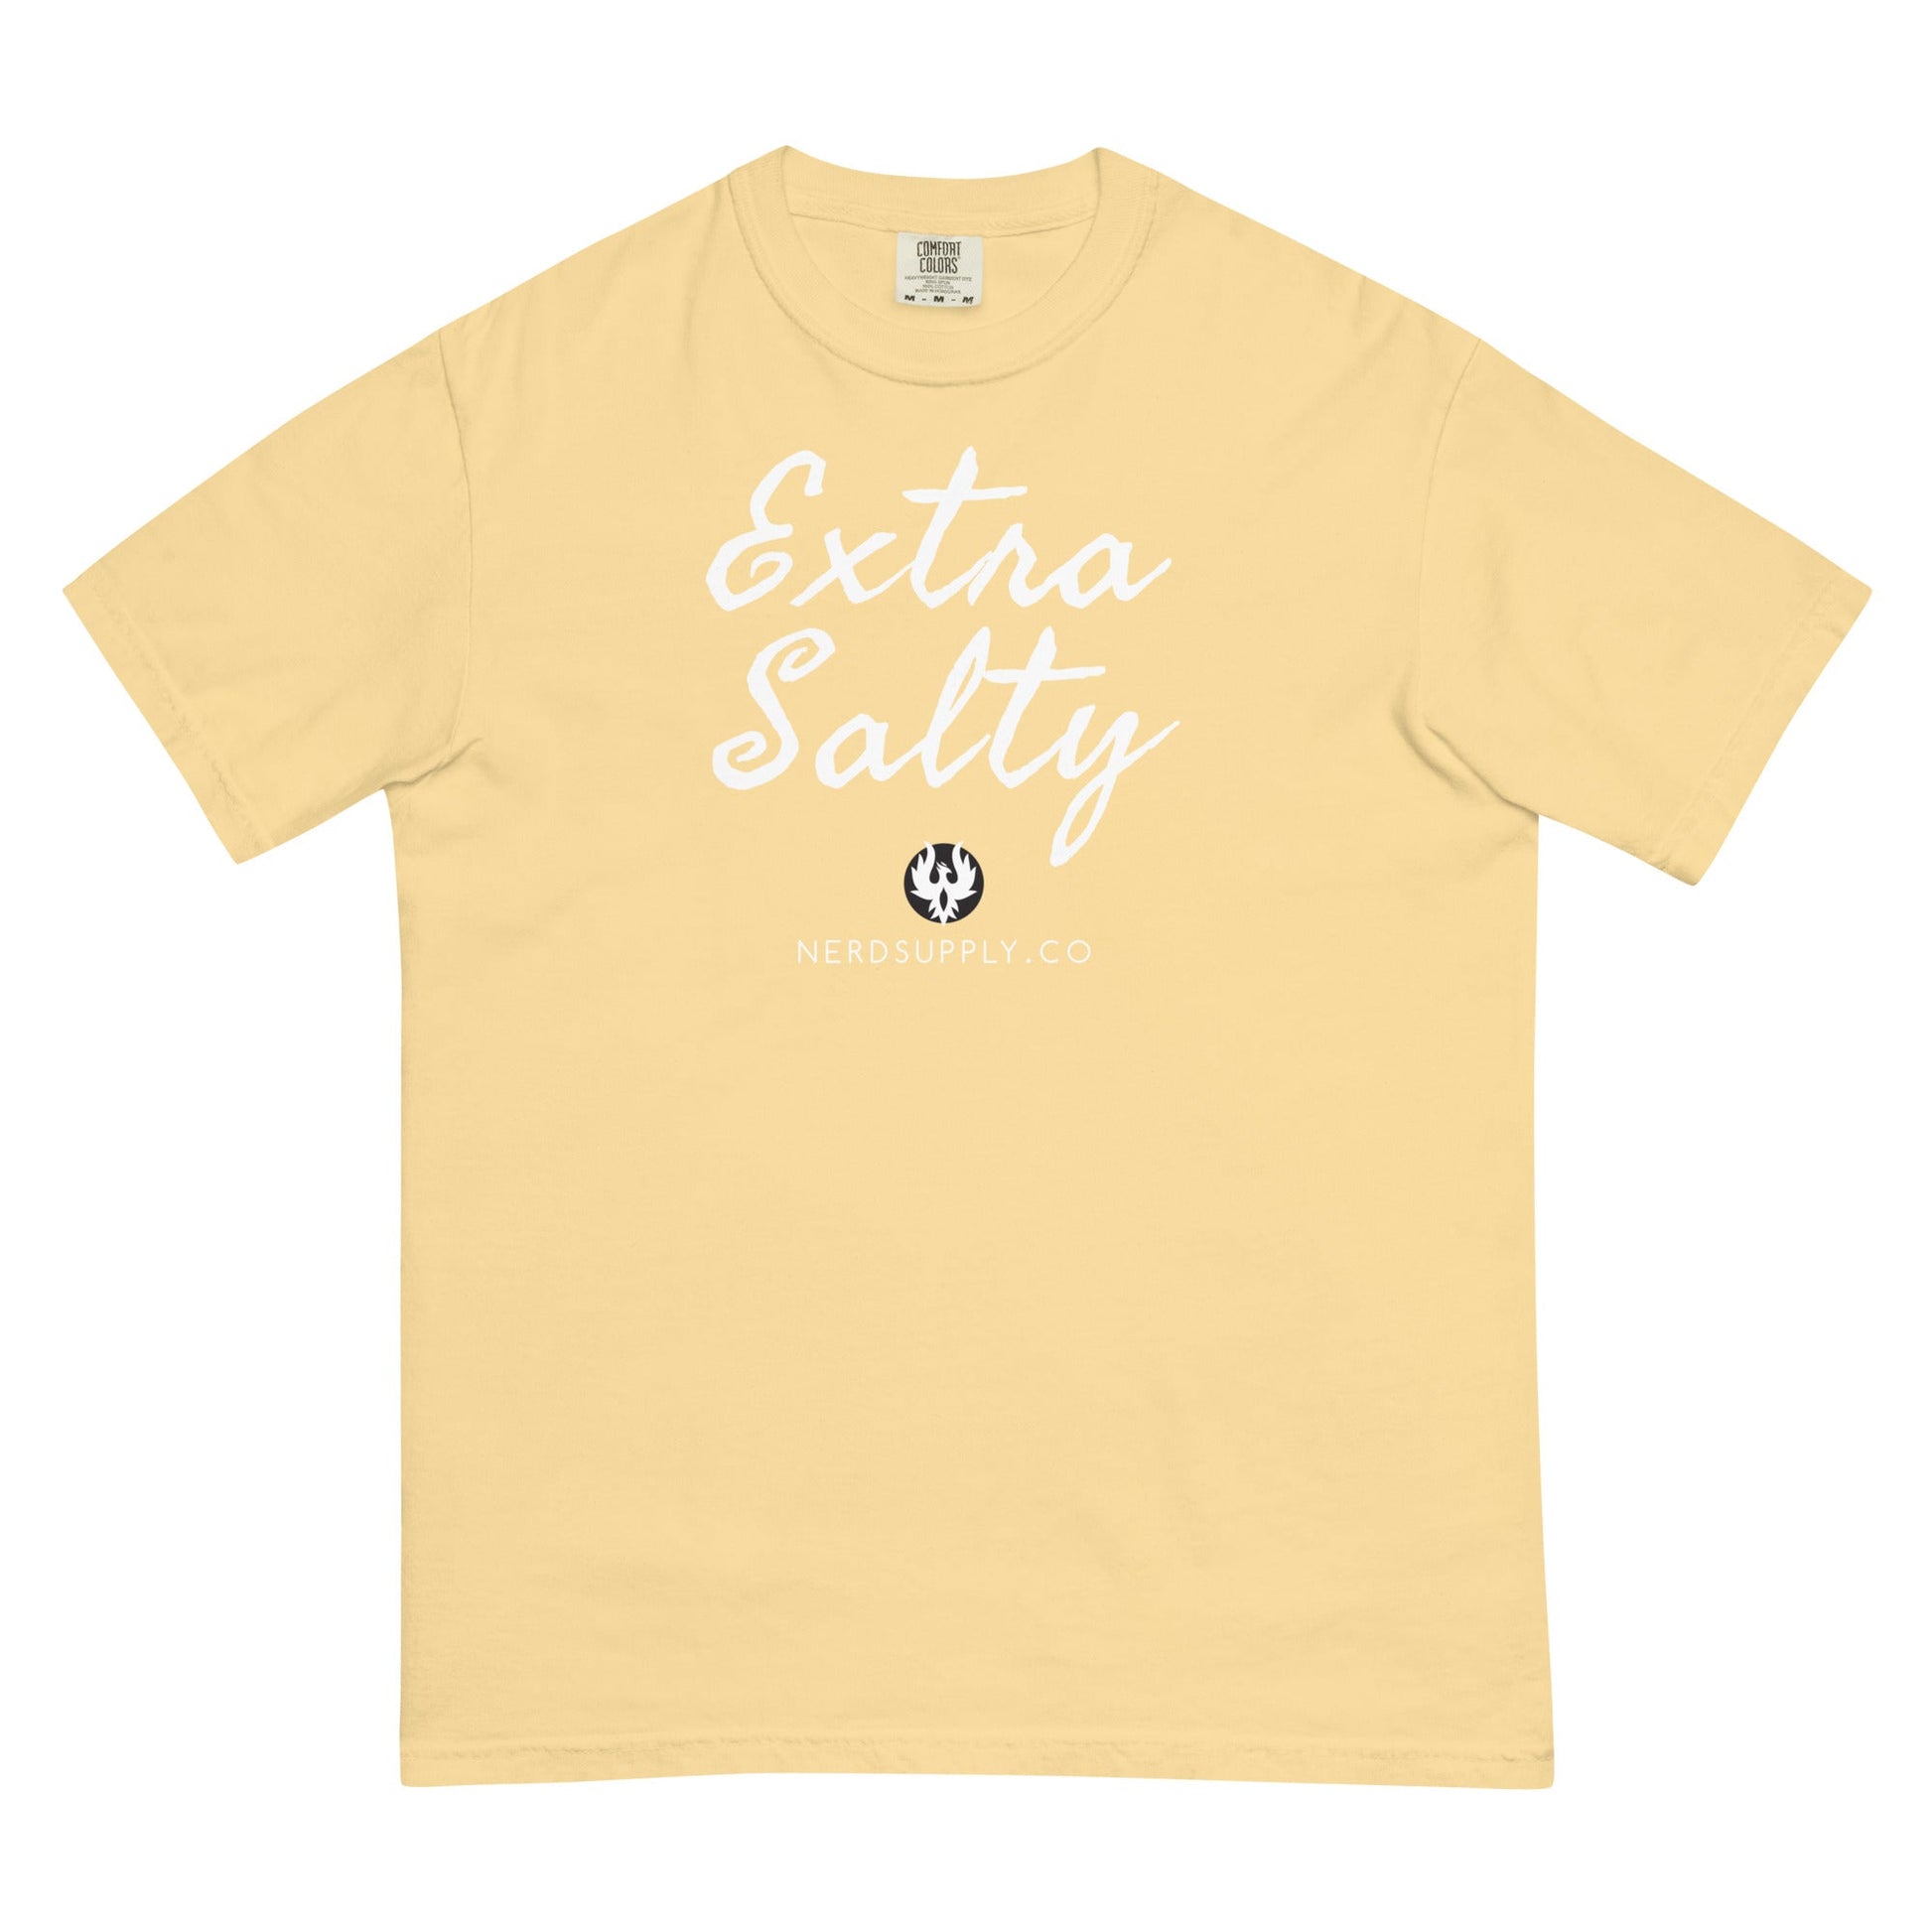 "Extra Salty" t-shirt - The Nerd Supply Company